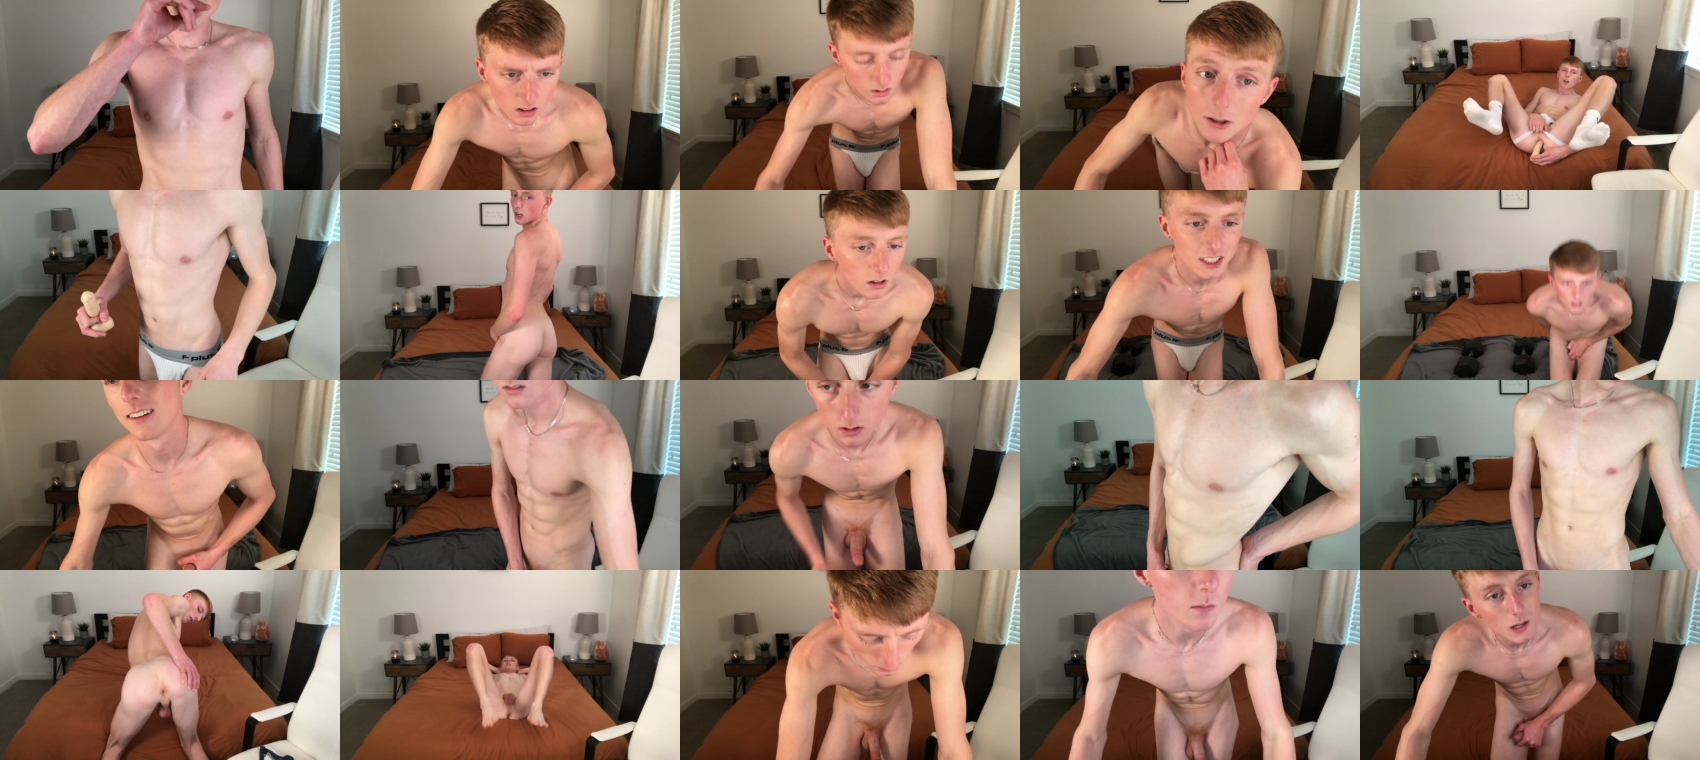 richiewest  01-02-2022 video Topless